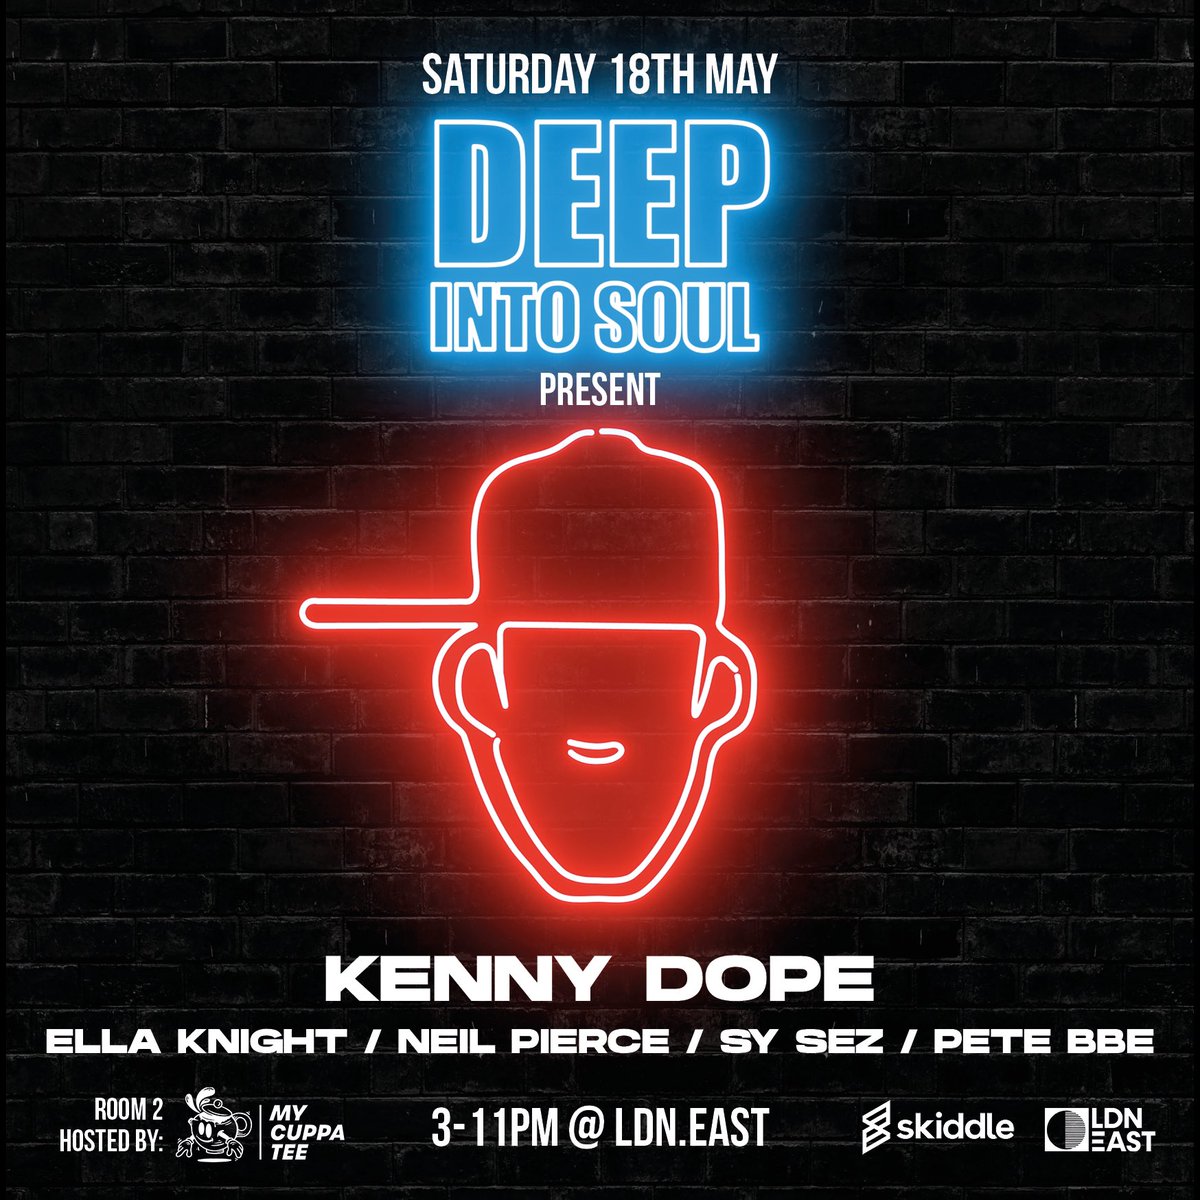 Just over 4 weeks to go until we welcome house master @Kdope50 to LDN.East for @DeepIntoSoul on Sat 18th May 1500-2300 💥 Will we see you?? 🎫 skiddle.com/whats-on/Londo…